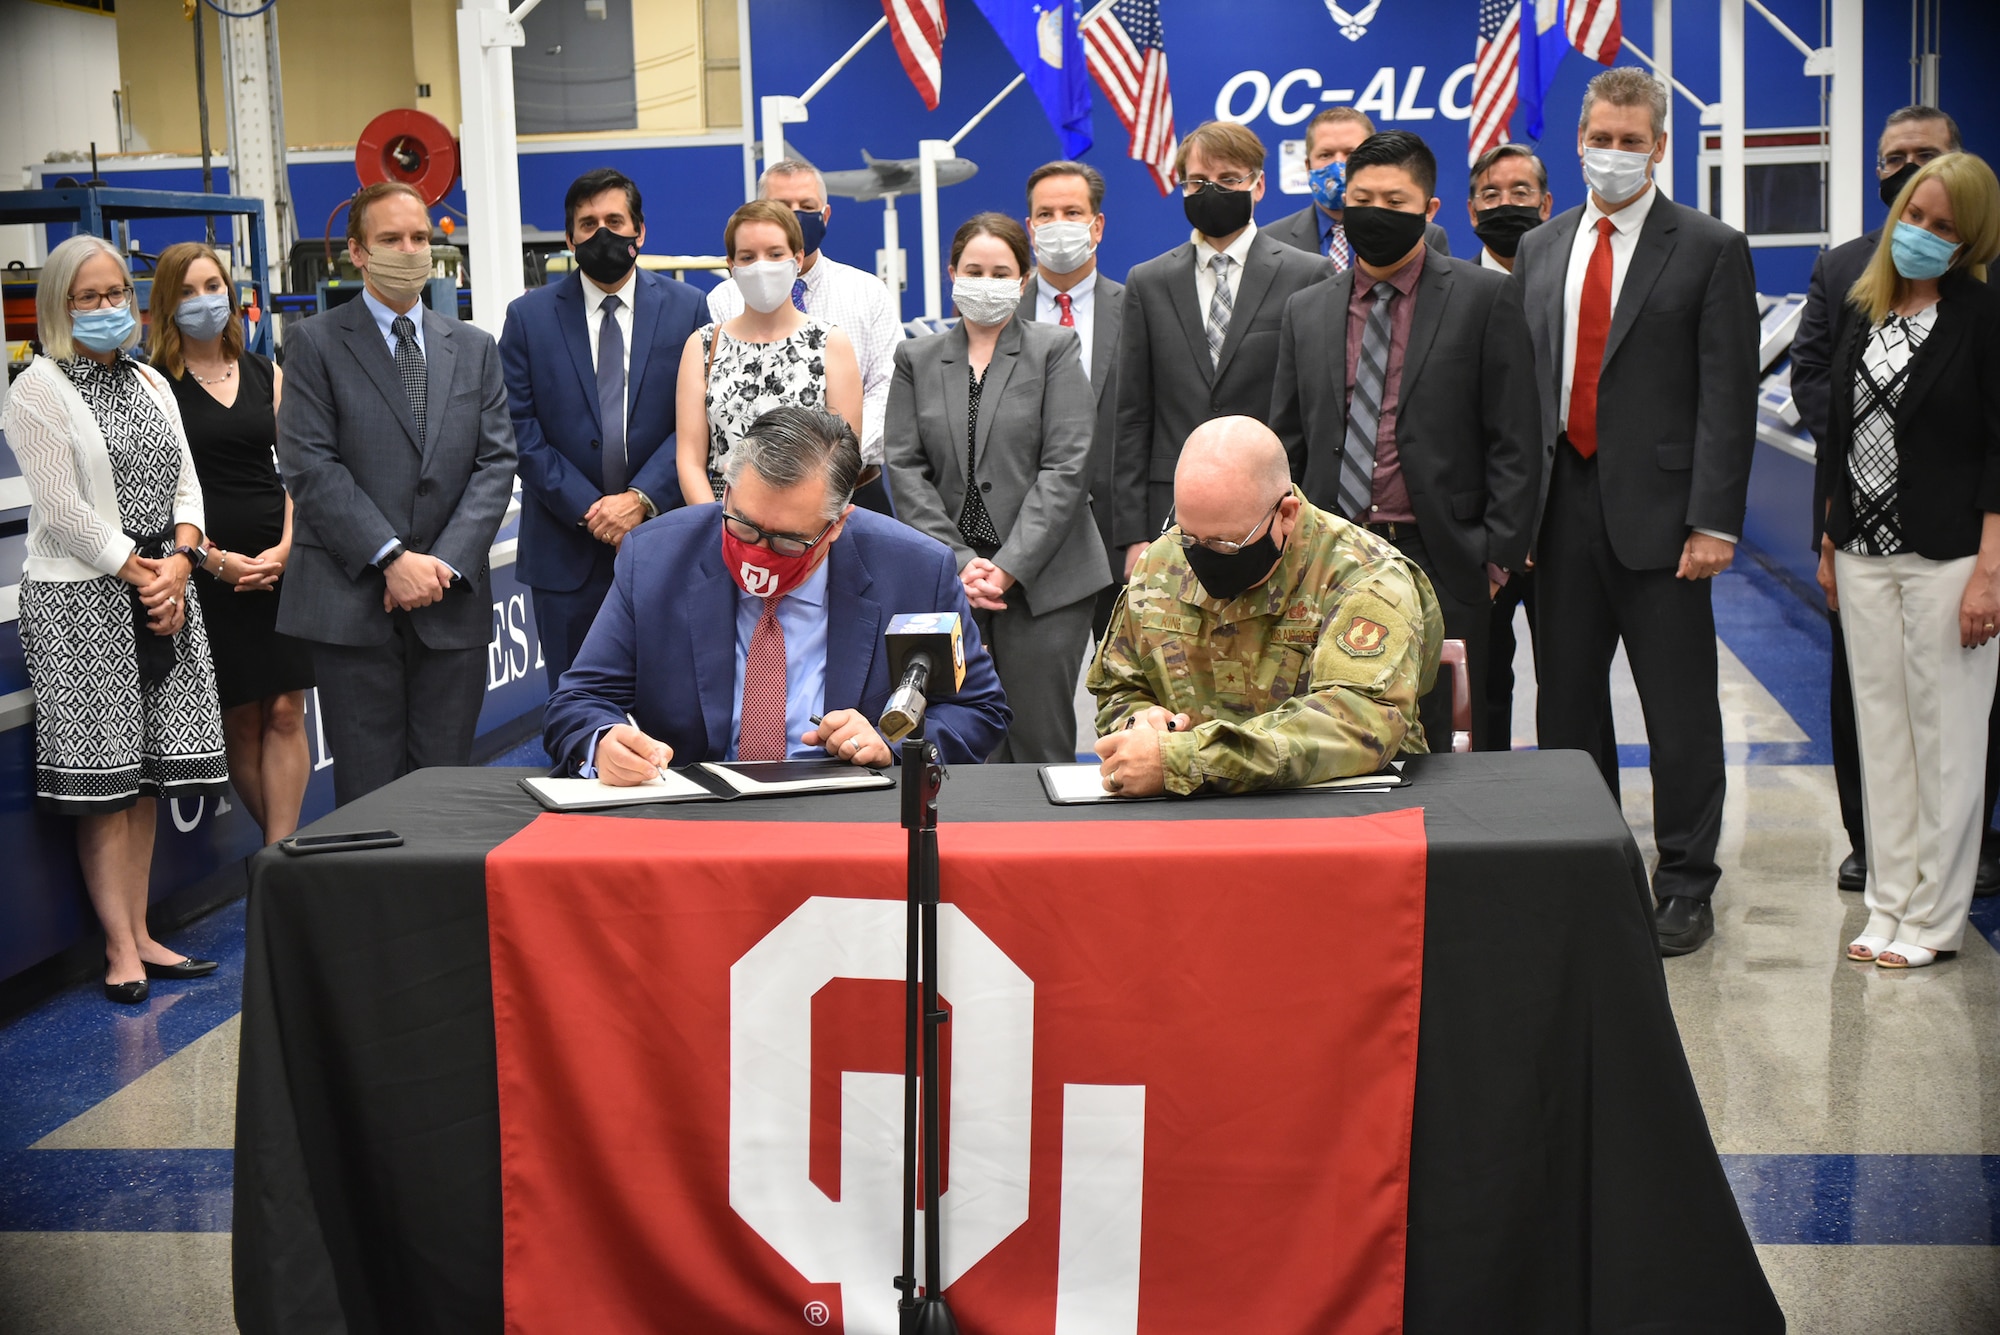 Dr. Tomás Díaz de la Rubia, University of Oklahoma vice president for Research and Partnerships, left, and Brig. Gen. Jeffrey R. King, Oklahoma City Air Logistics Complex commander, sign an Educational Partnership Agreement July 14, 2020. The agreement will help both institutions cultivate aerospace technology development and will improve and enhance education in science, technology, engineering, and mathematics at the university. (Air Force photo by April McDonald)